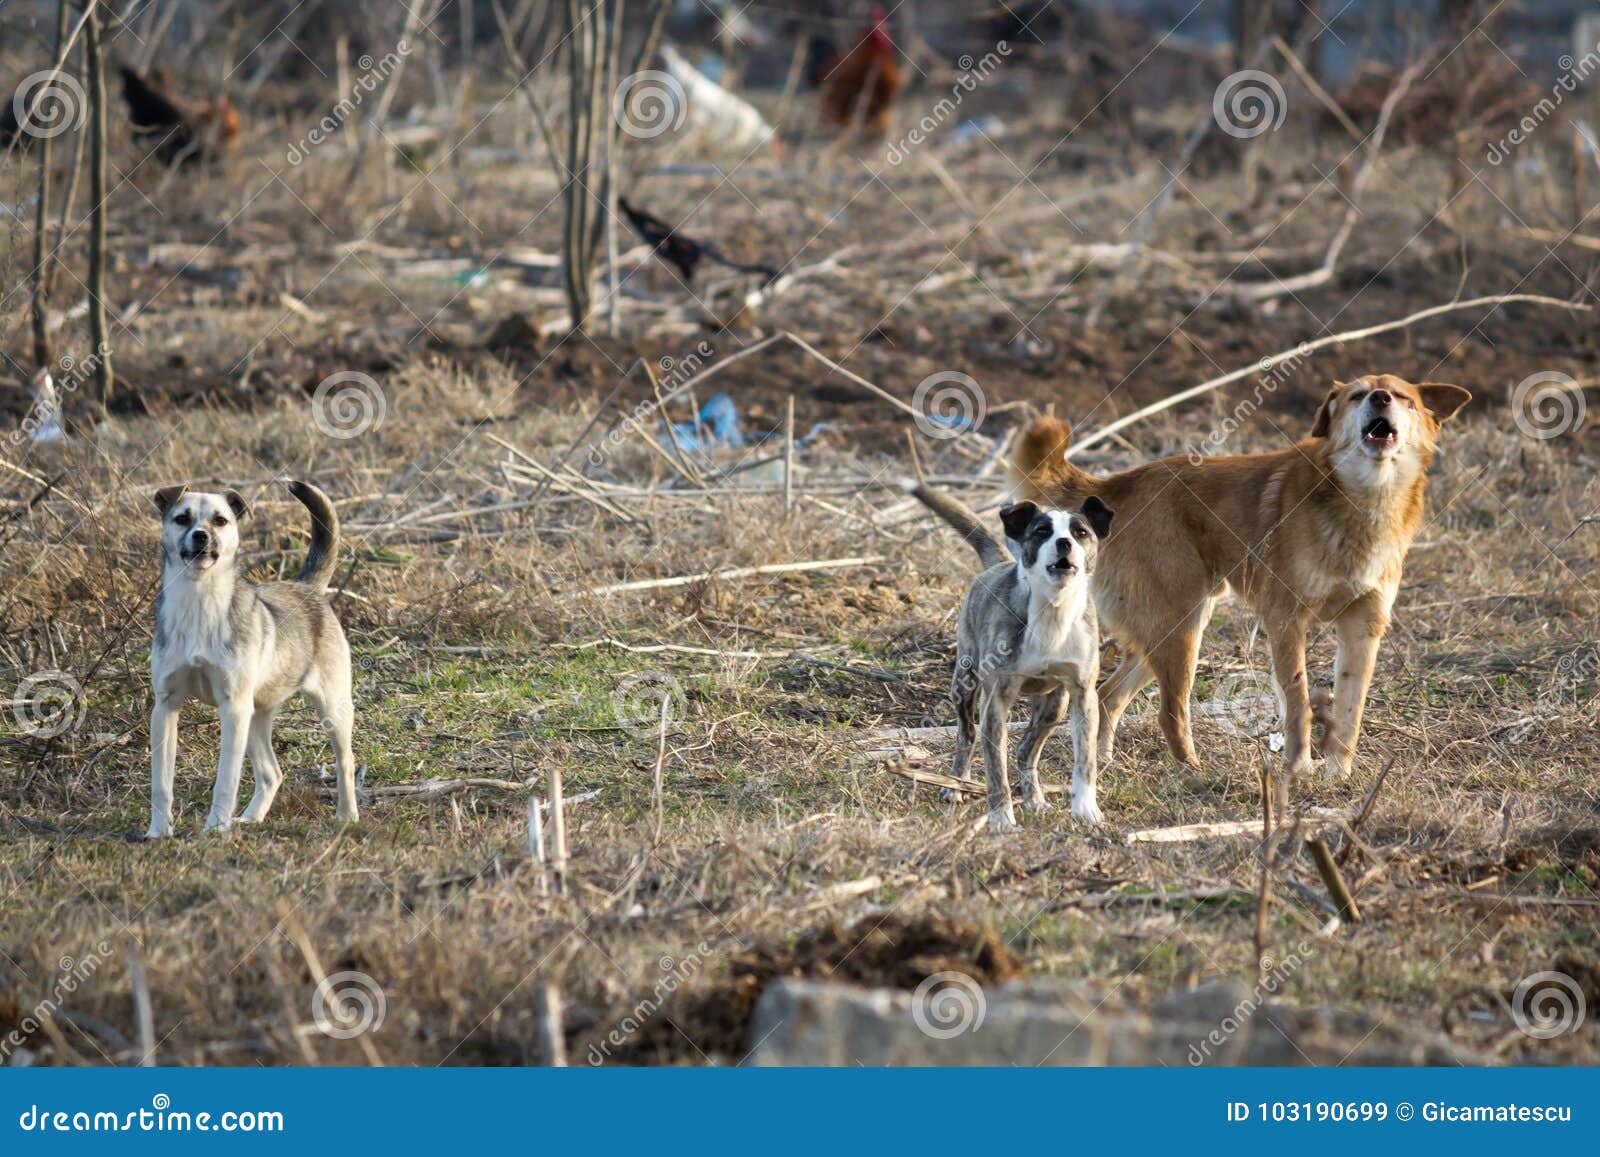 stray dogs ready to attack